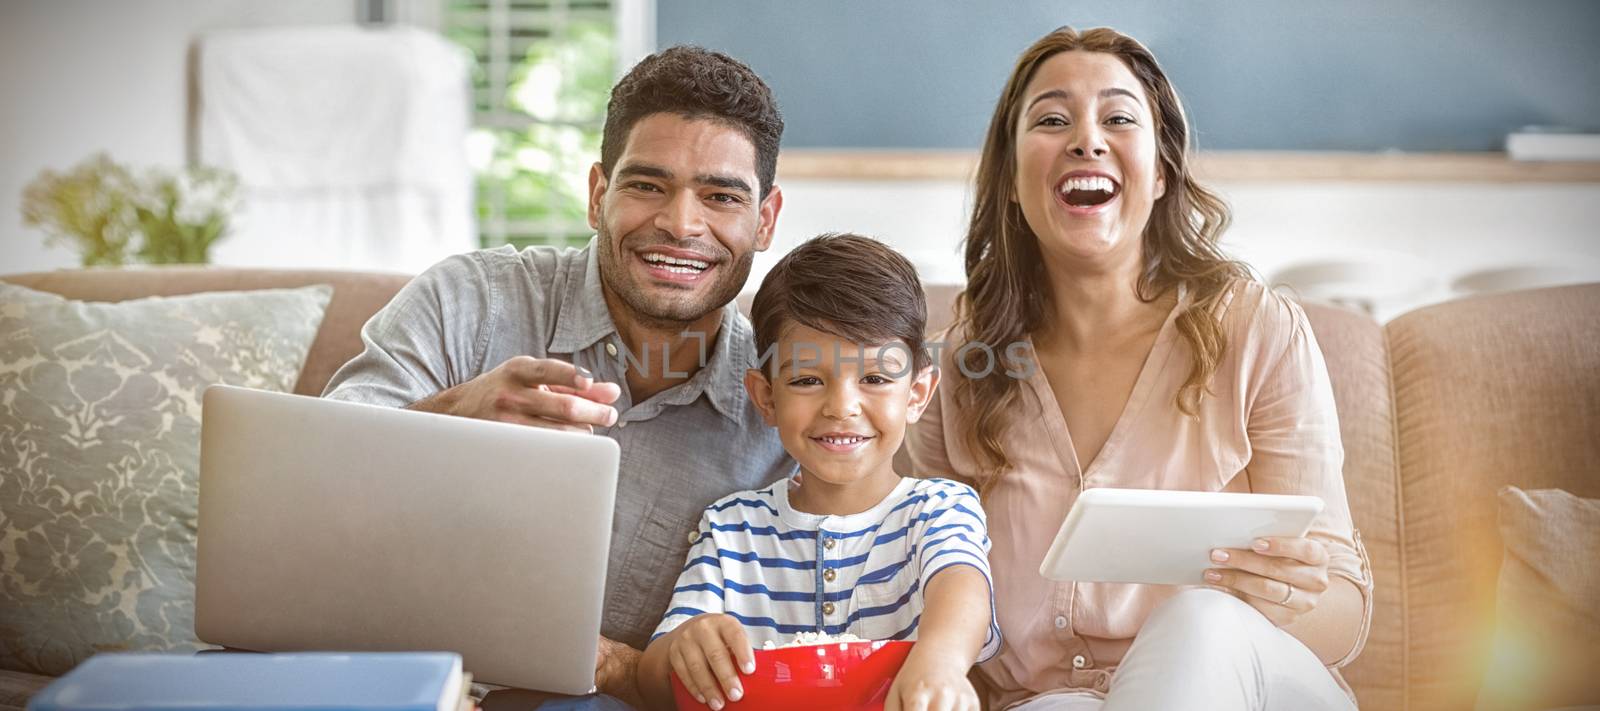 Portrait of son watching television while father and mother using laptop and digital tablet at home